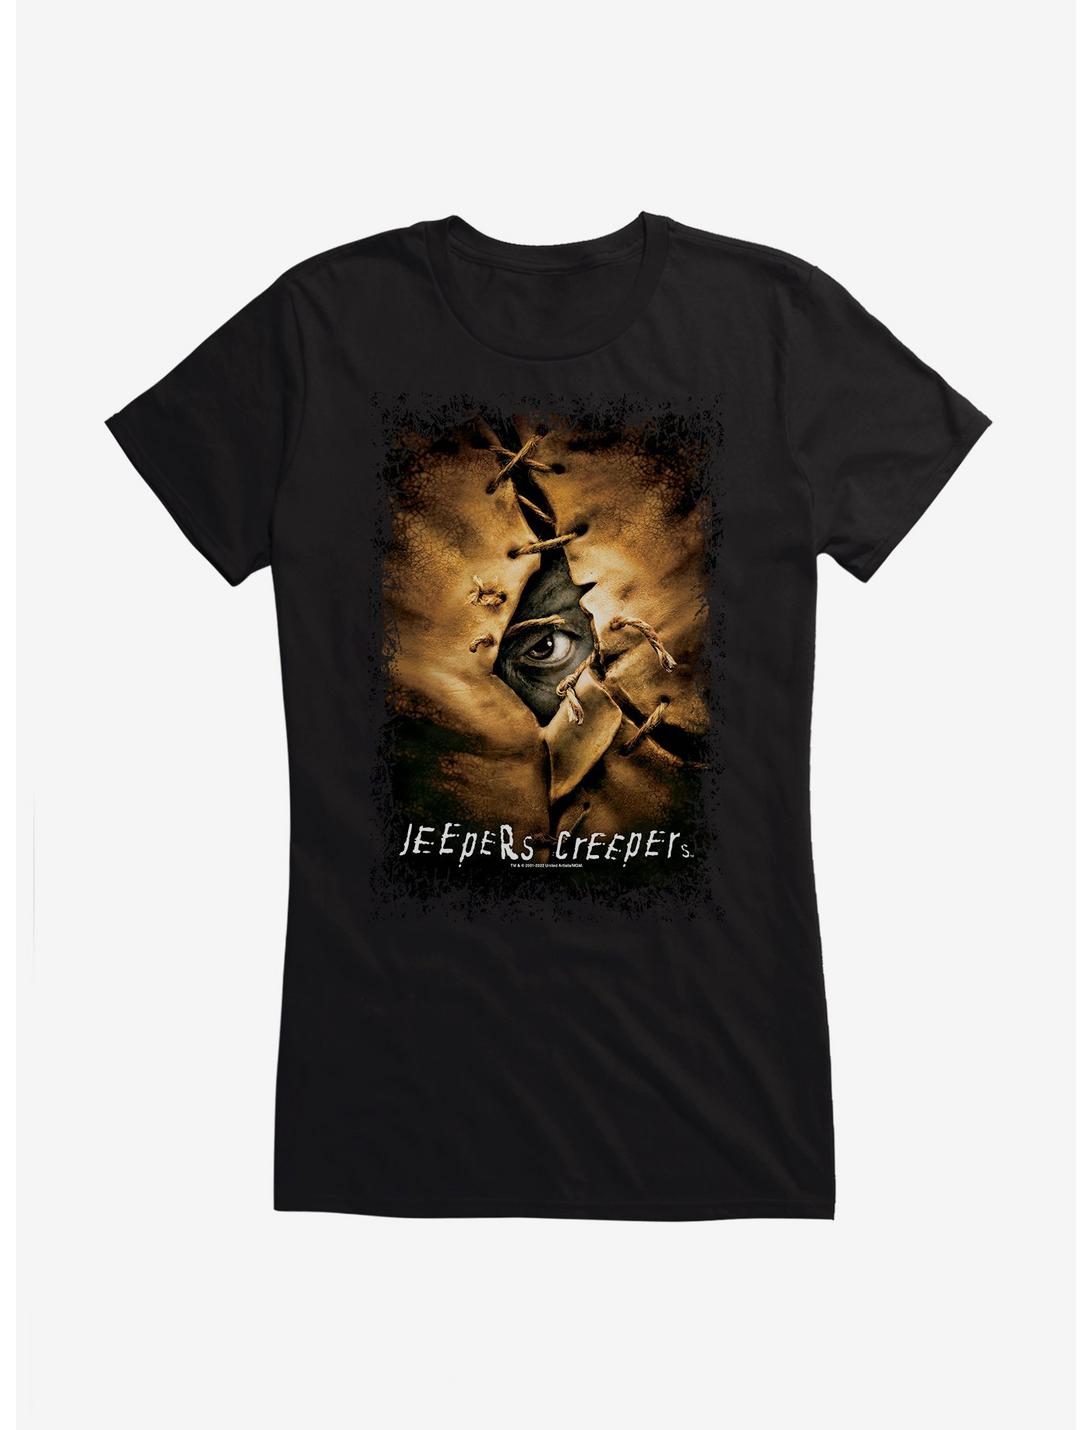 Jeepers Creepers Poster Girls T-Shirt, BLACK, hi-res